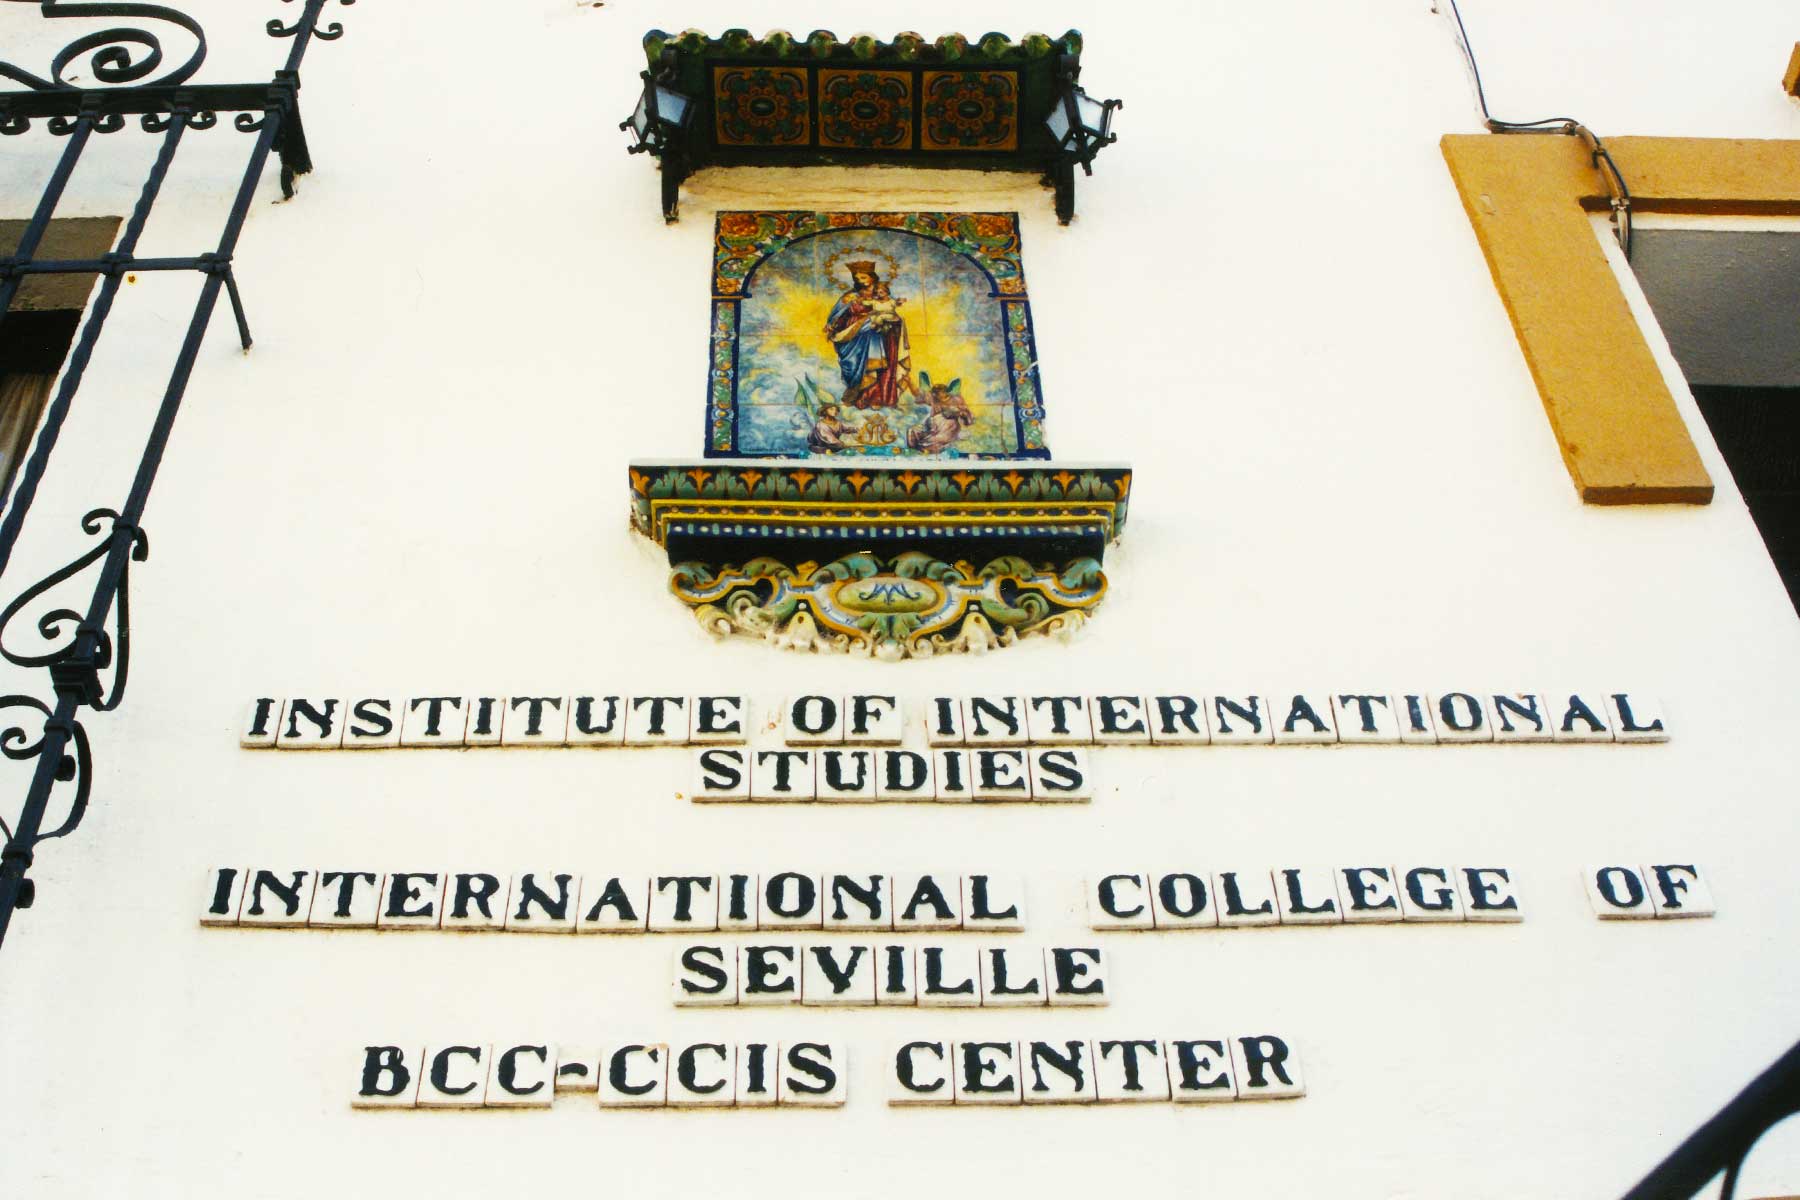 Study Abroad - International College of Seville Spain - College Consortium for International Studies (CCIS) Center - Steven Andrew Martin - Photo Journal - 